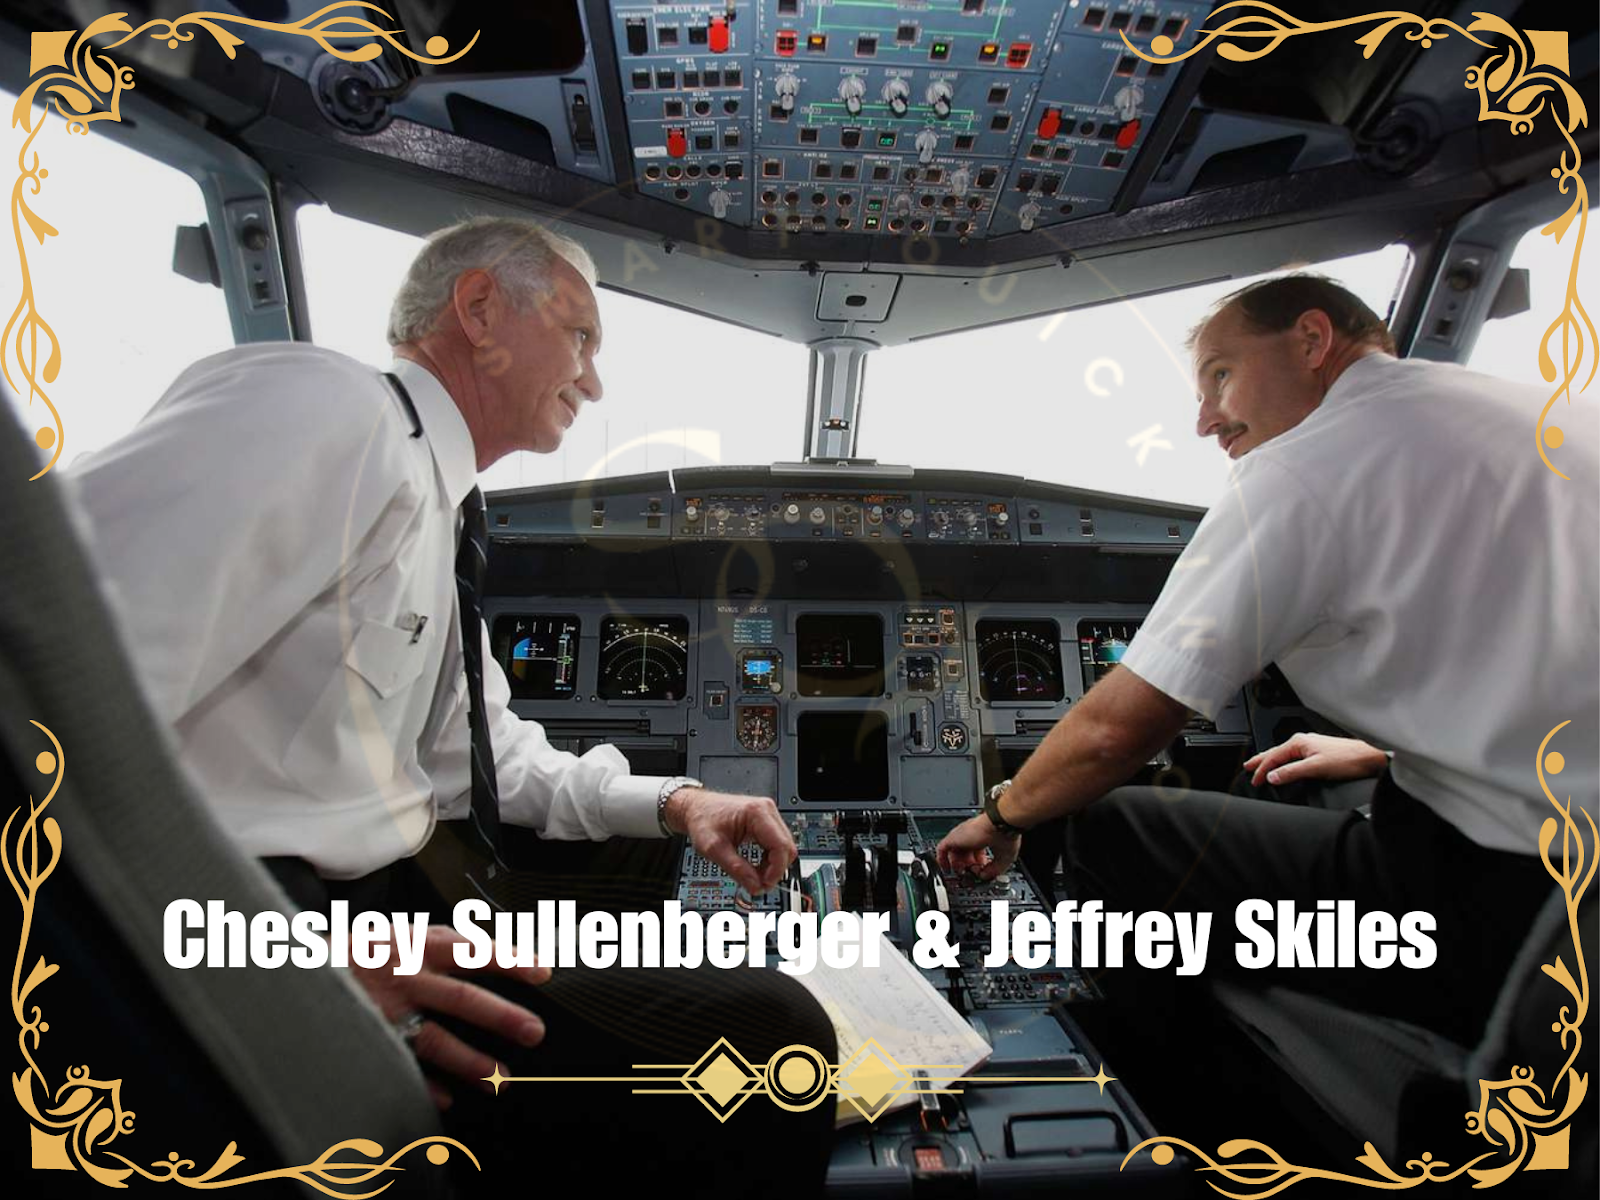 Inspirational Stories of Hope
Chesley Sullenberger &  Jeffrey Skiles